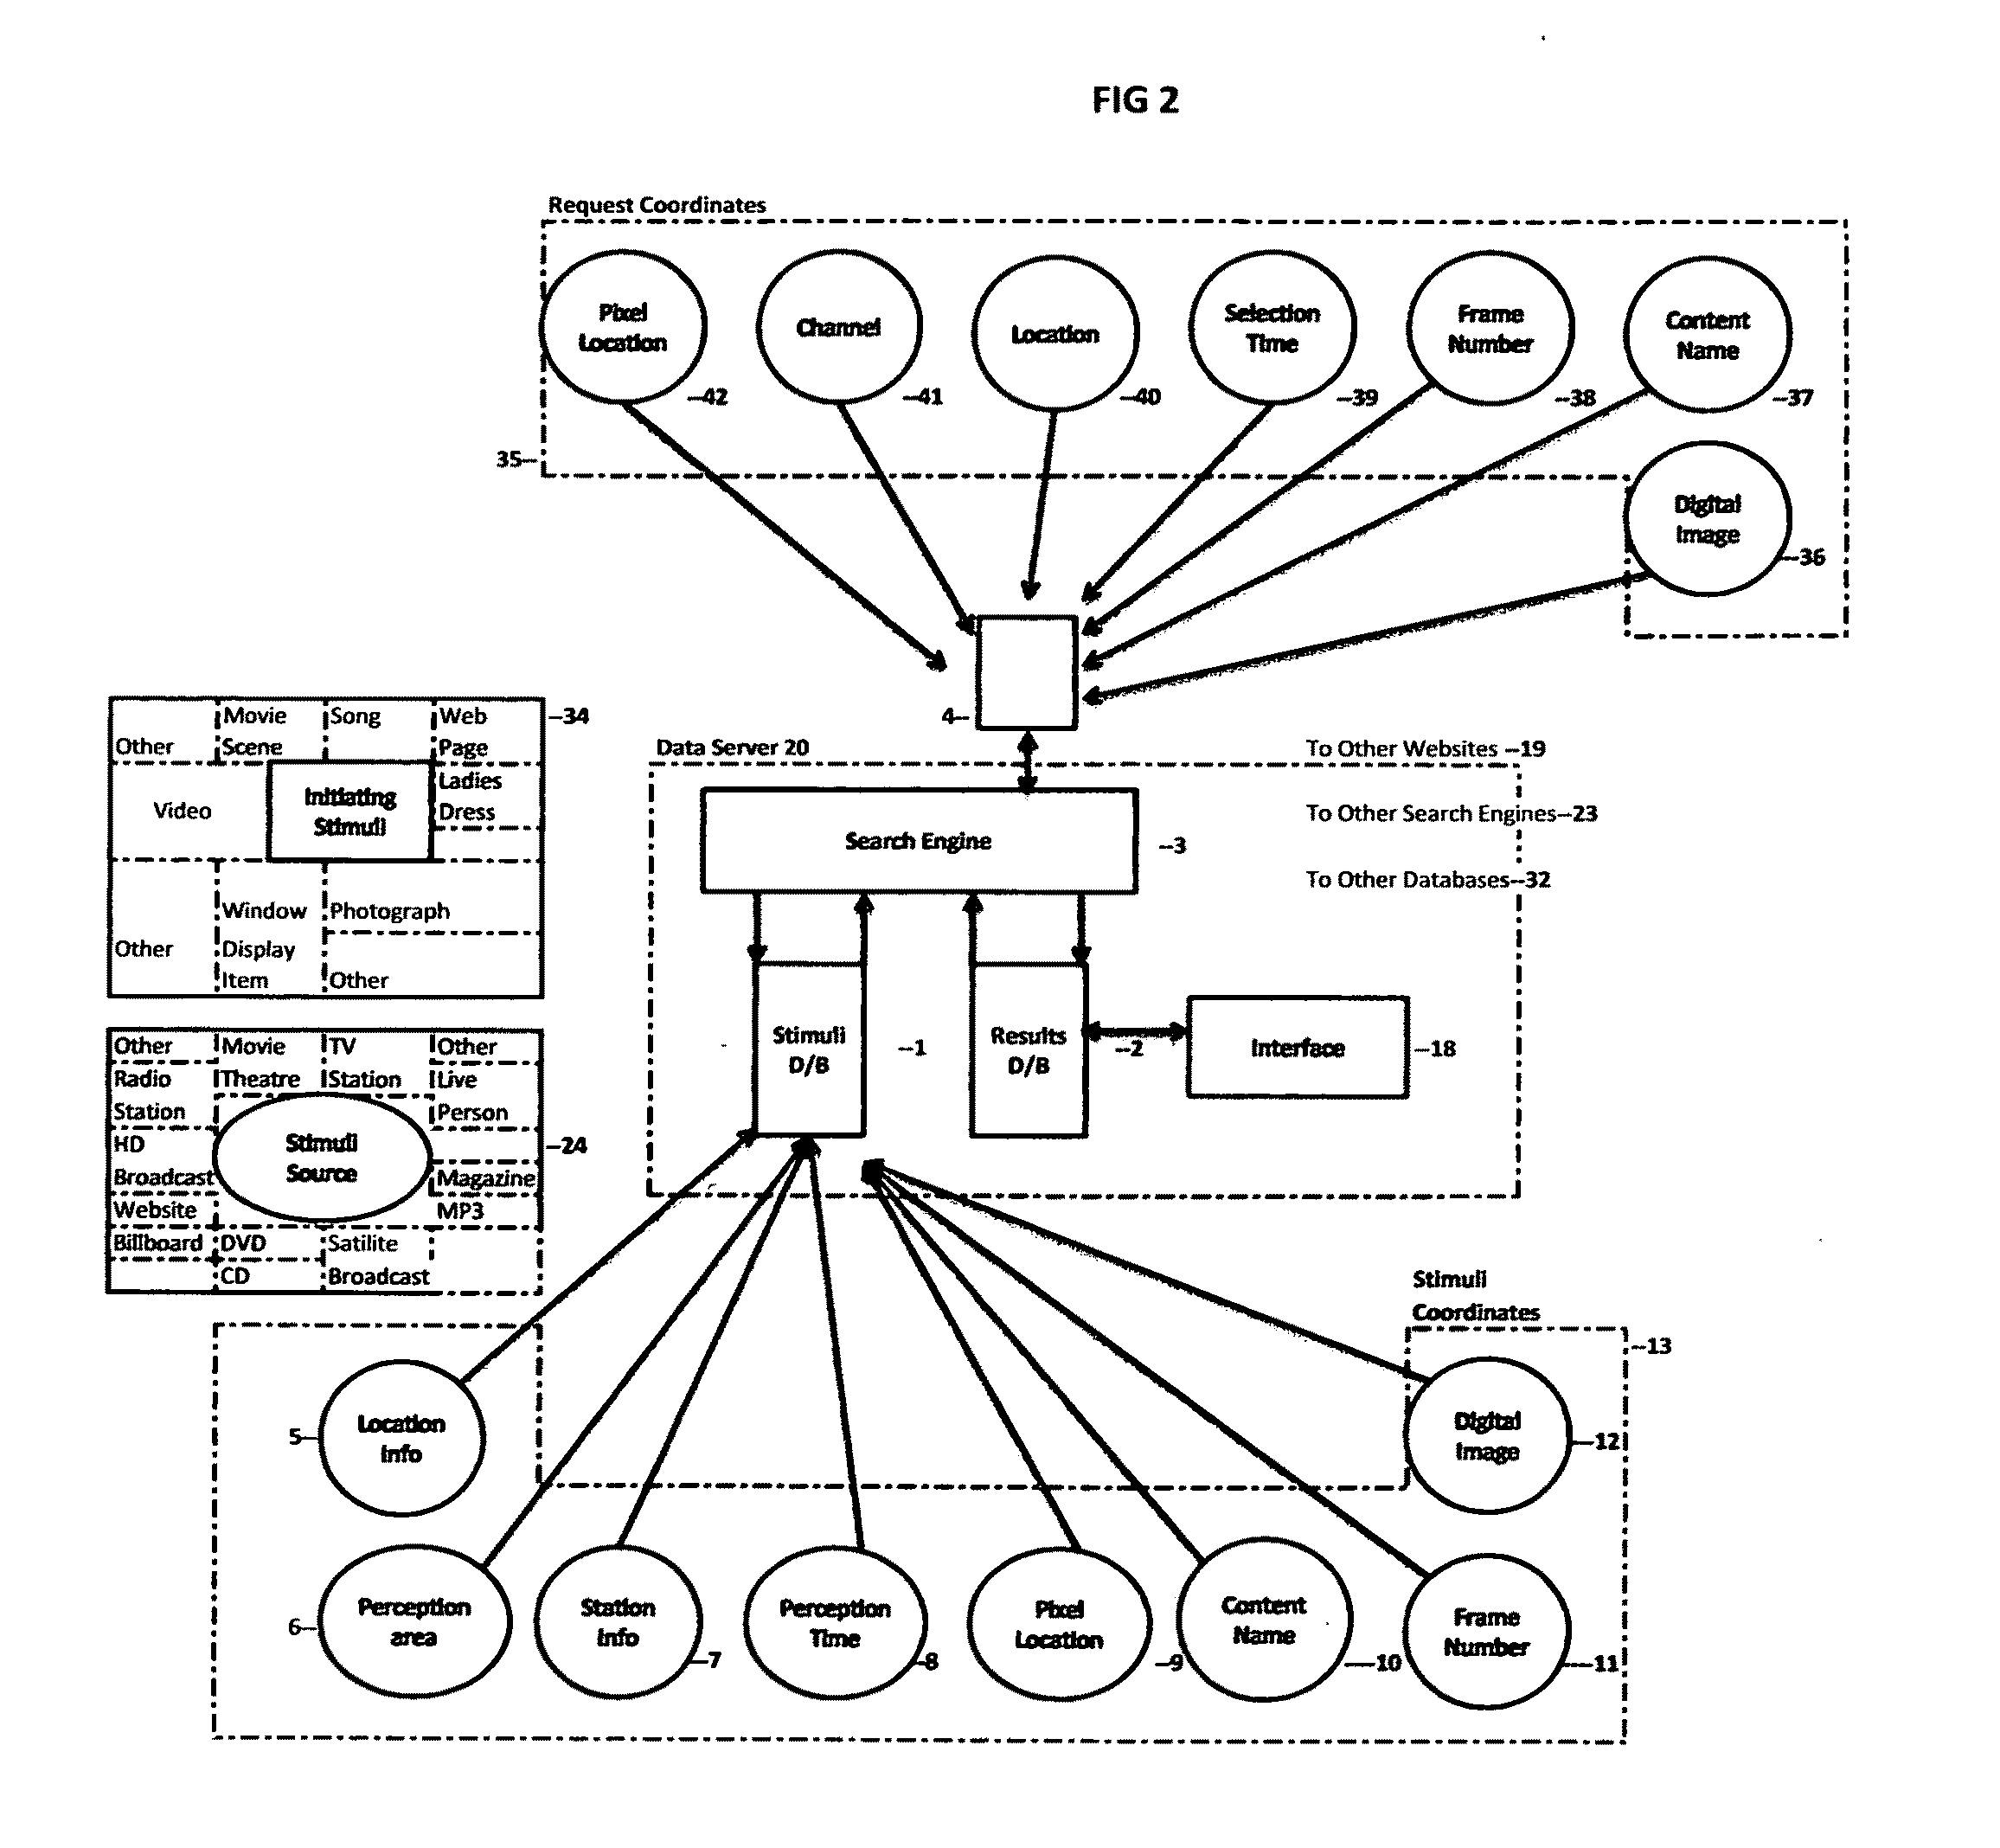 System and methods for searching based on a response to a plurality of both stimuli source types, and initiating stimuli types, without the need for a keyboard